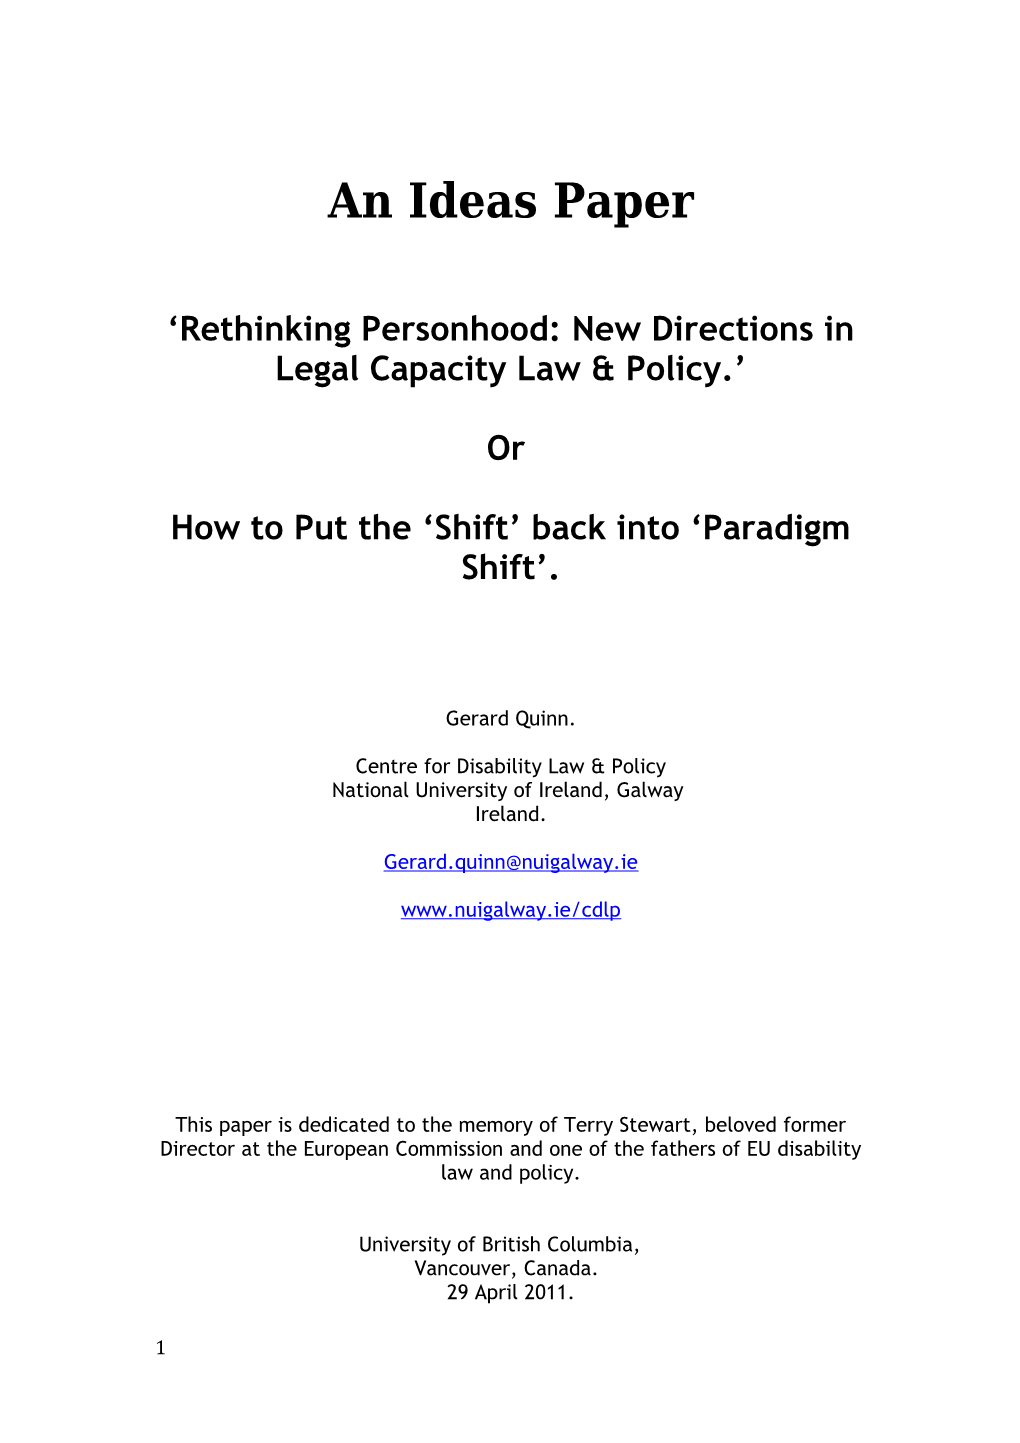 Rethinking Personhood: New Directions in Legal Capacity Law & Policy